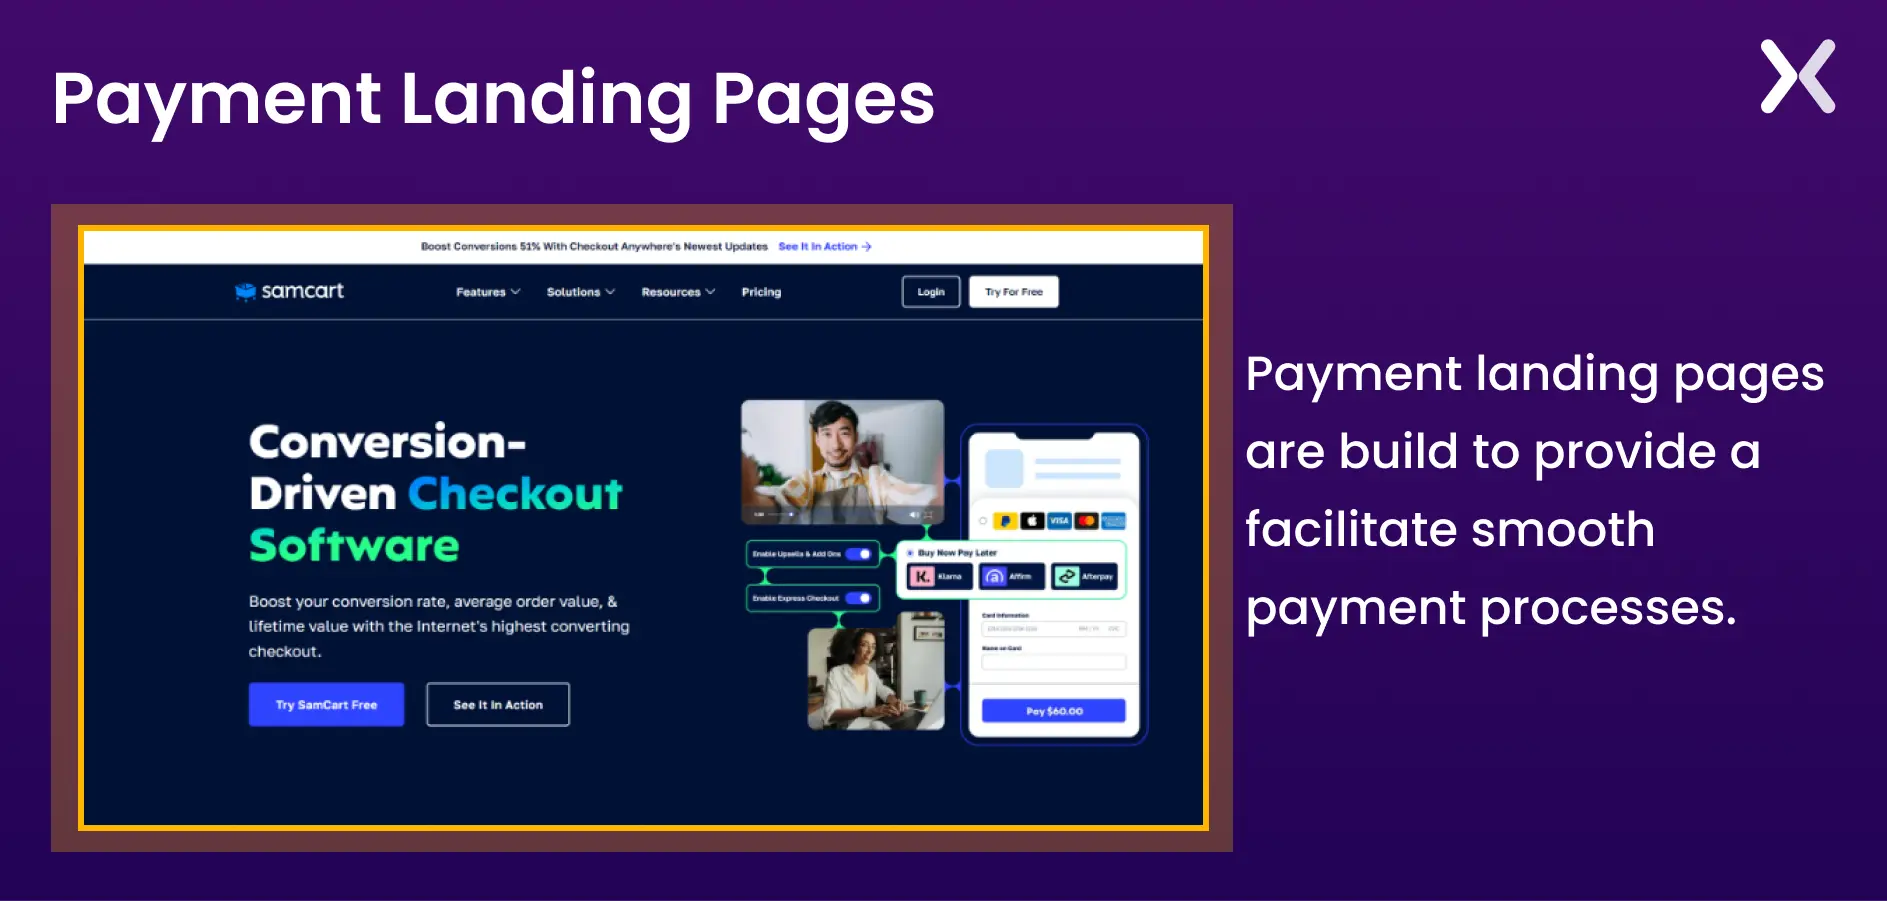 landing-pages-for-making-payments.webp